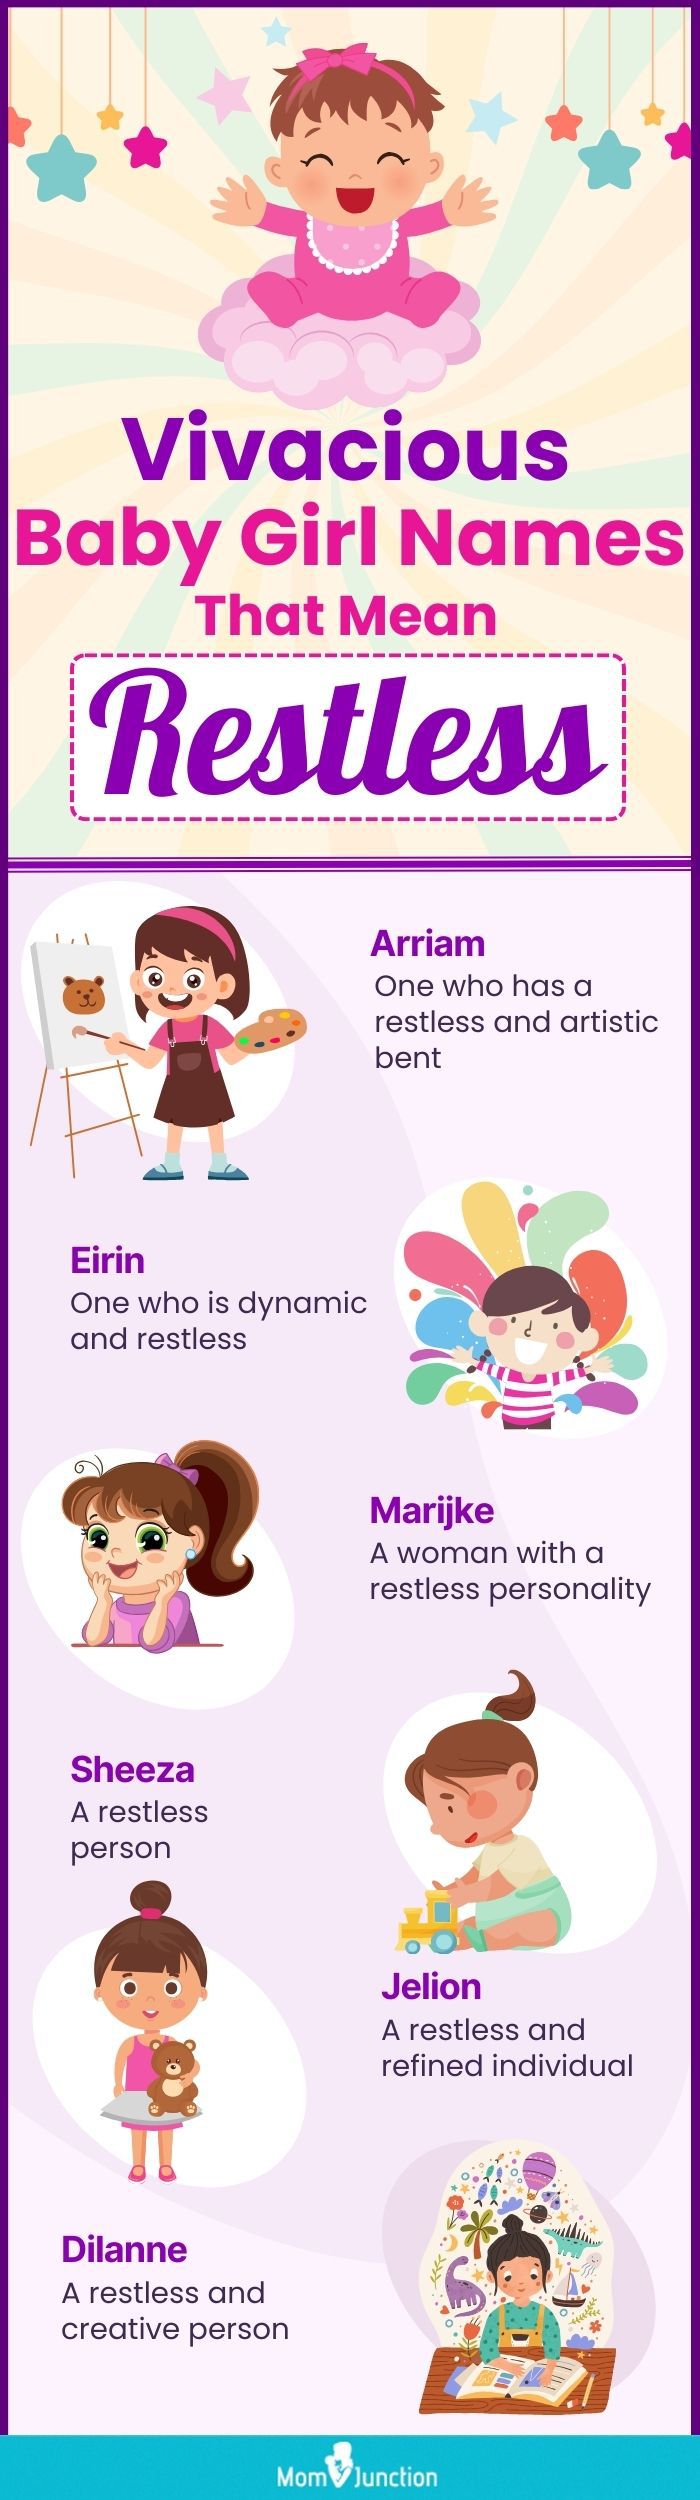 vivacious baby girl names that mean restless (infographic)